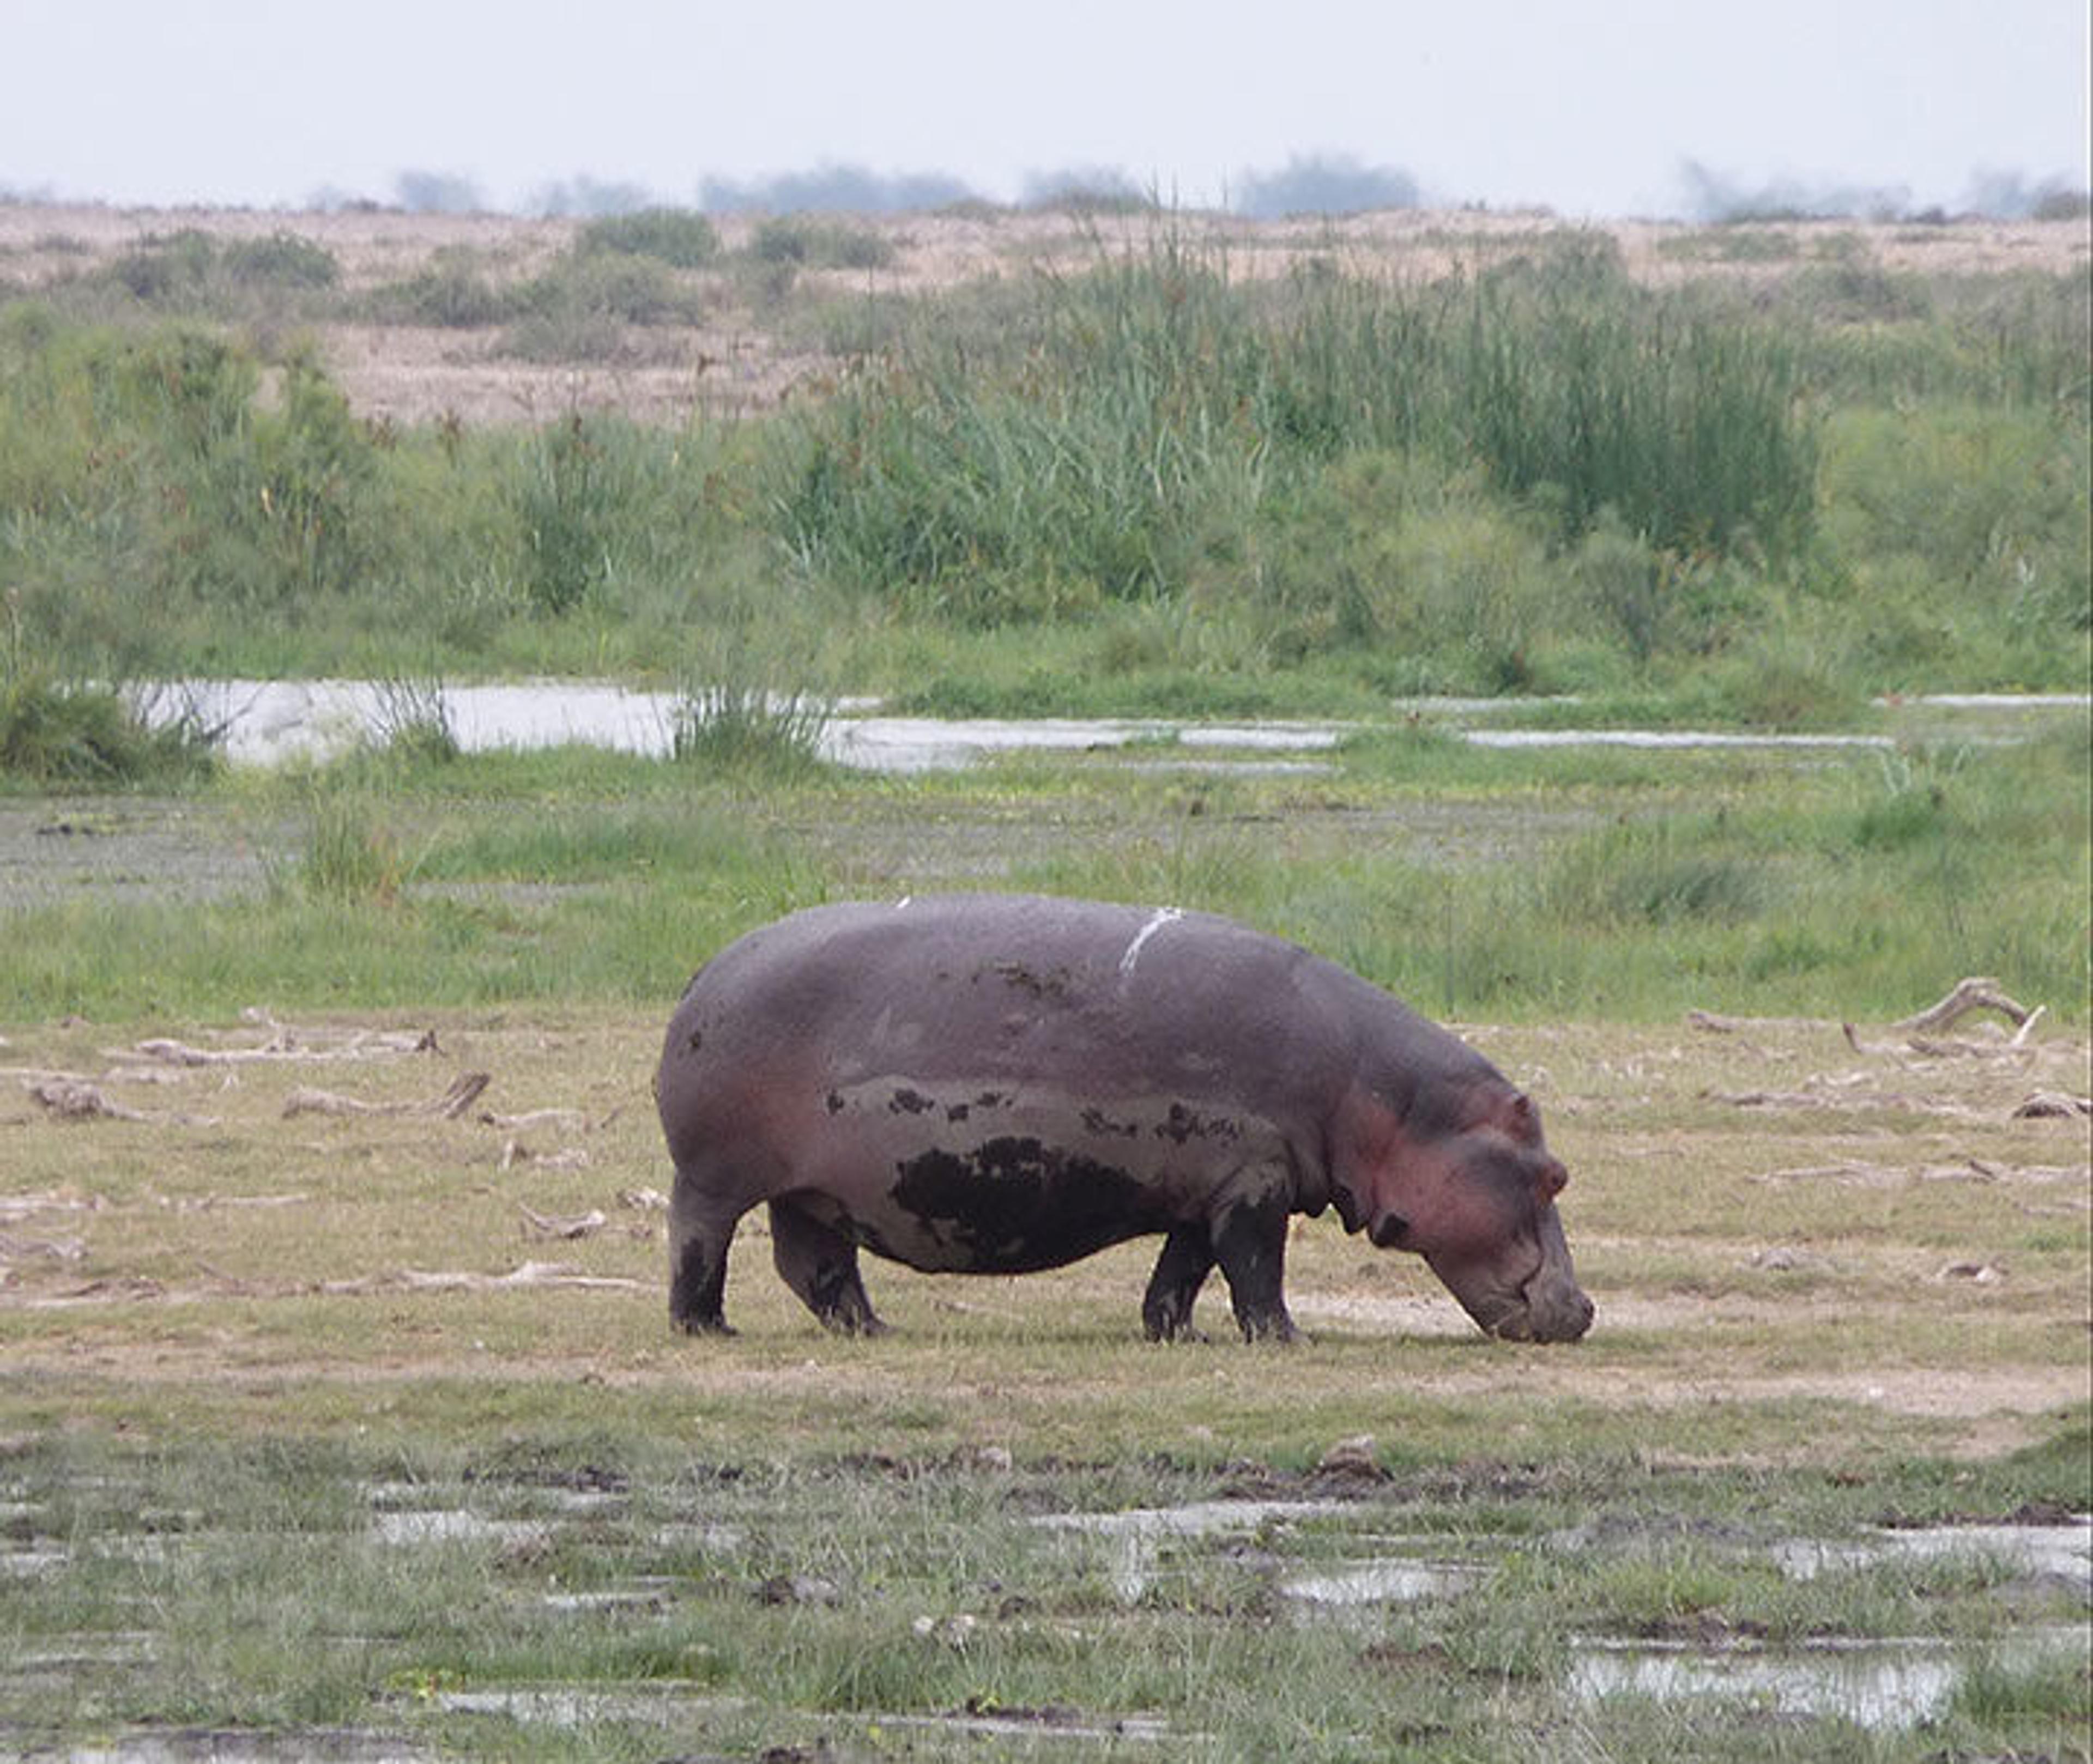  A real hippo in wetlands near the dried-up bed of Lake Amboseli. The hippo is brown and its underside is pinkish.